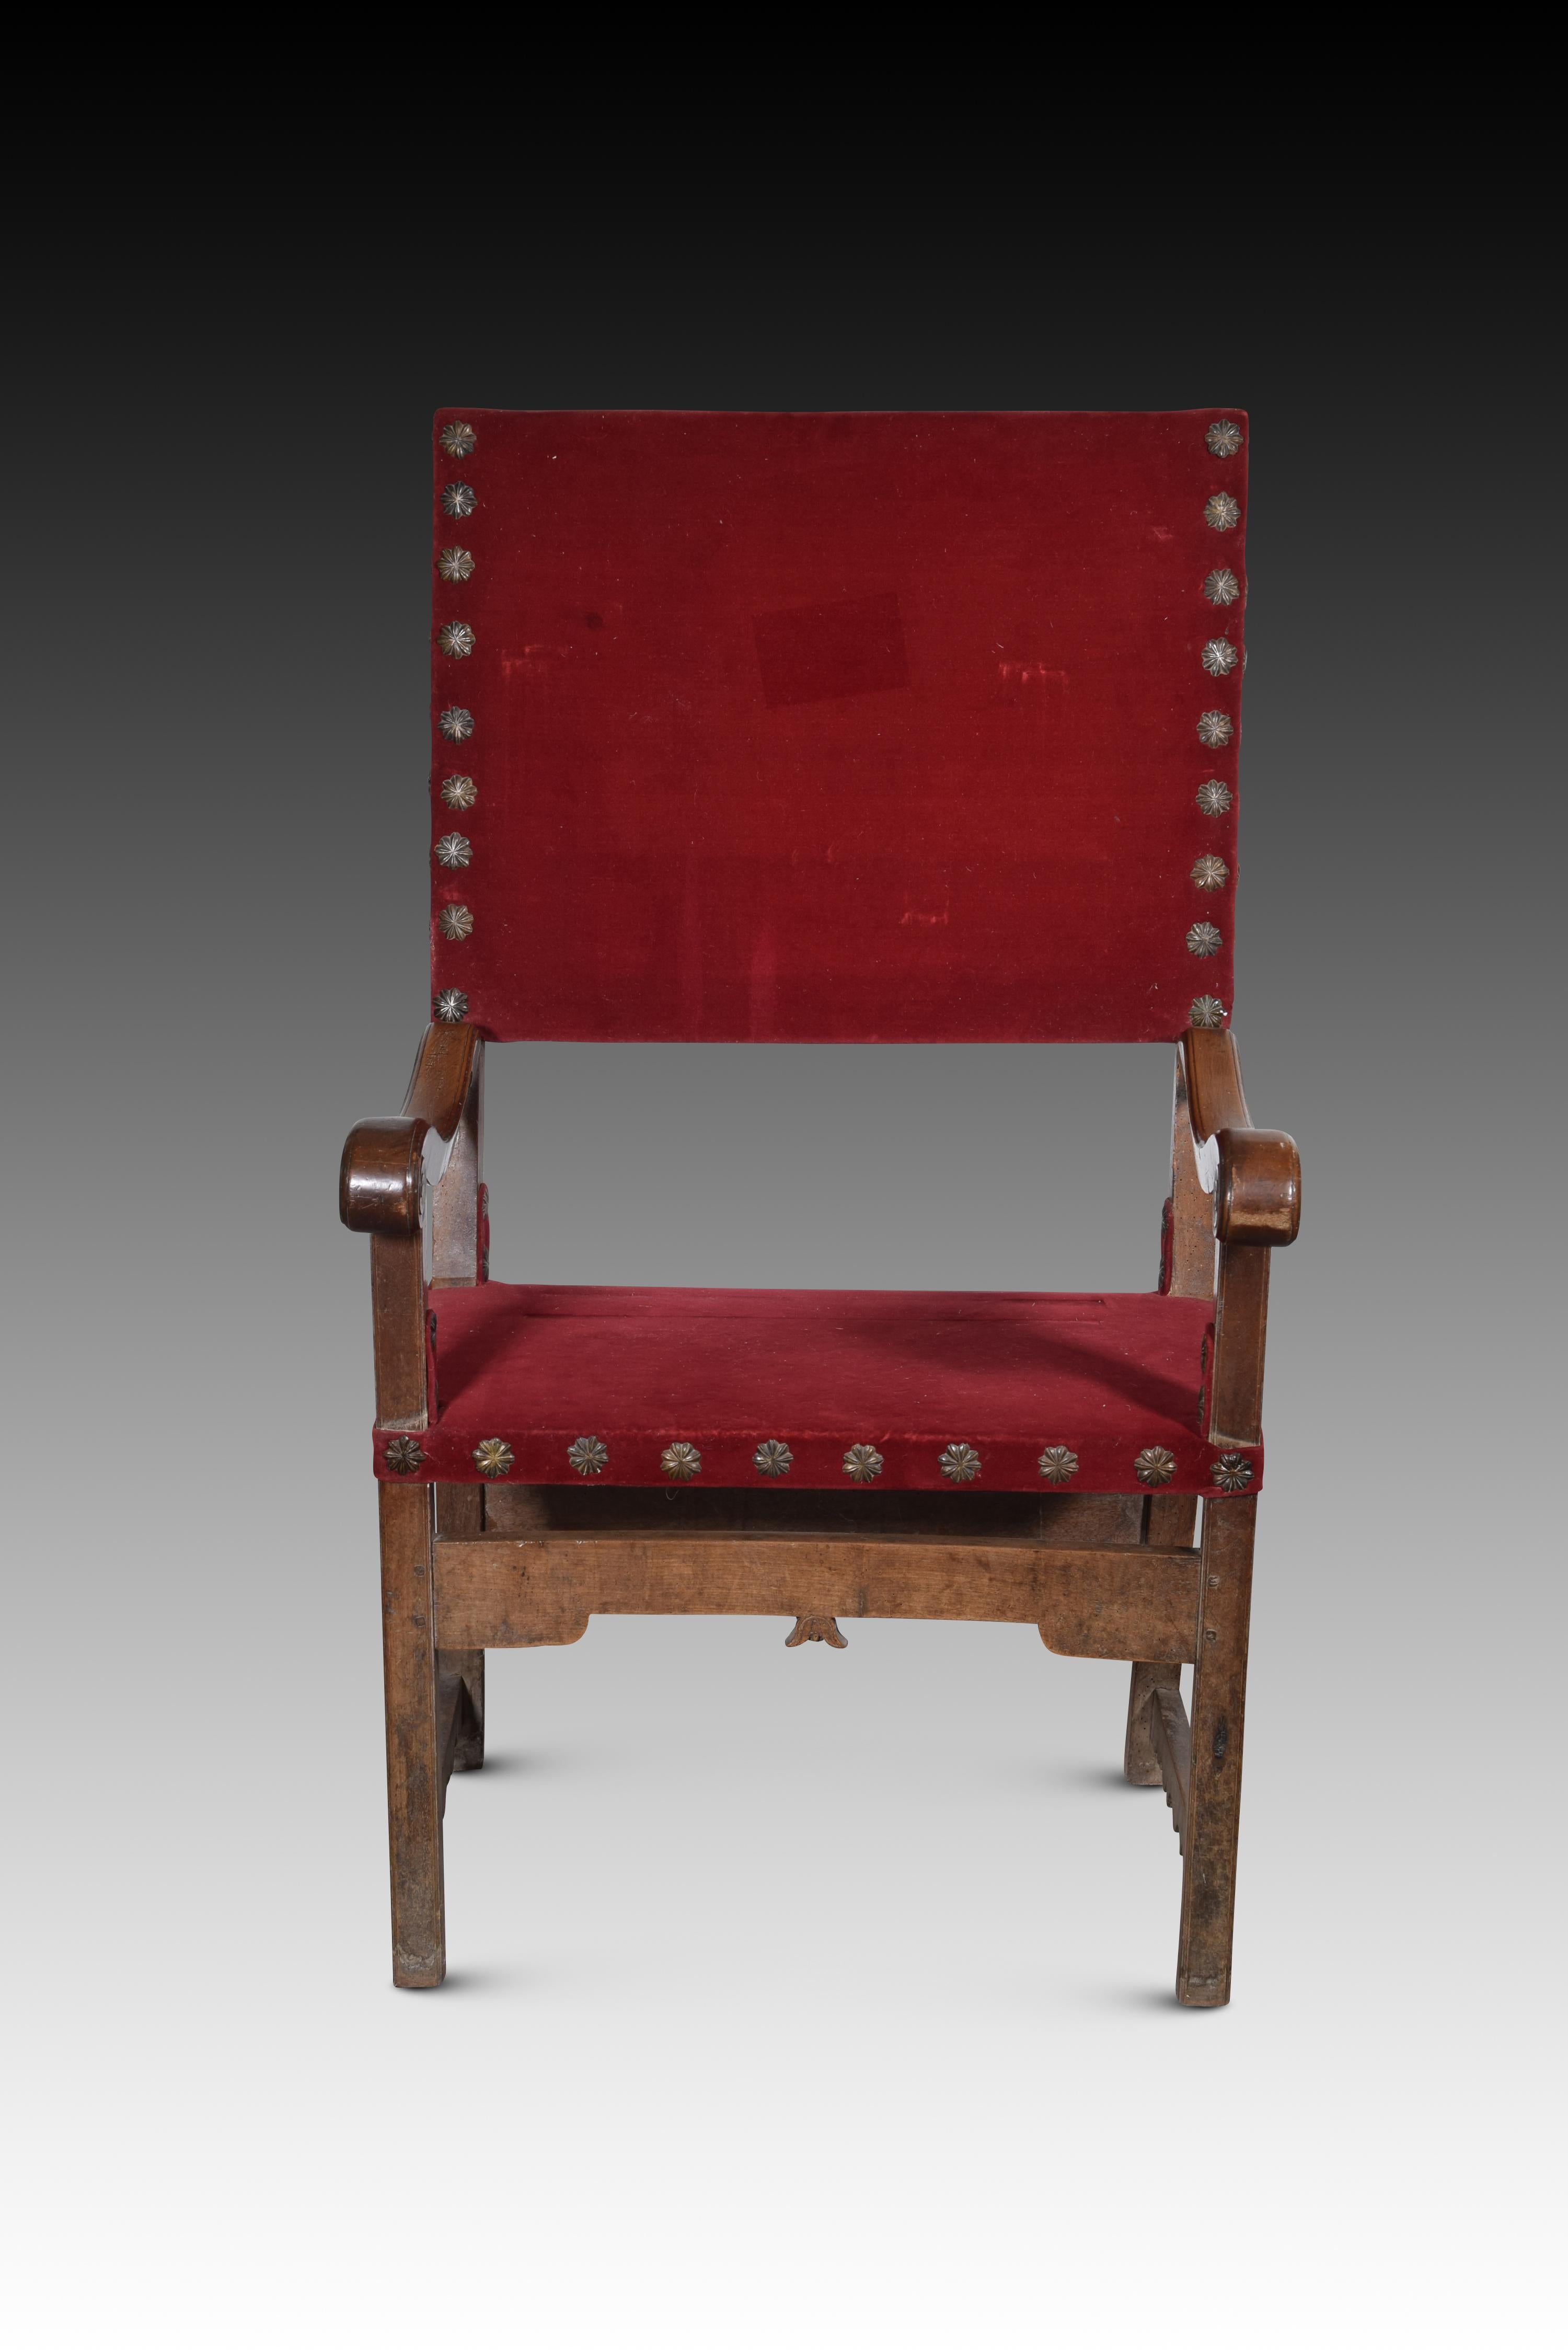 Friar armchair. Walnut wood, textile. Spain, 17th century. 
Armchair with arms and high back of the type known as “frailero”, which has a textile upholstery with studs on the seat and back, low cut-out low profile chambrances joining the front legs